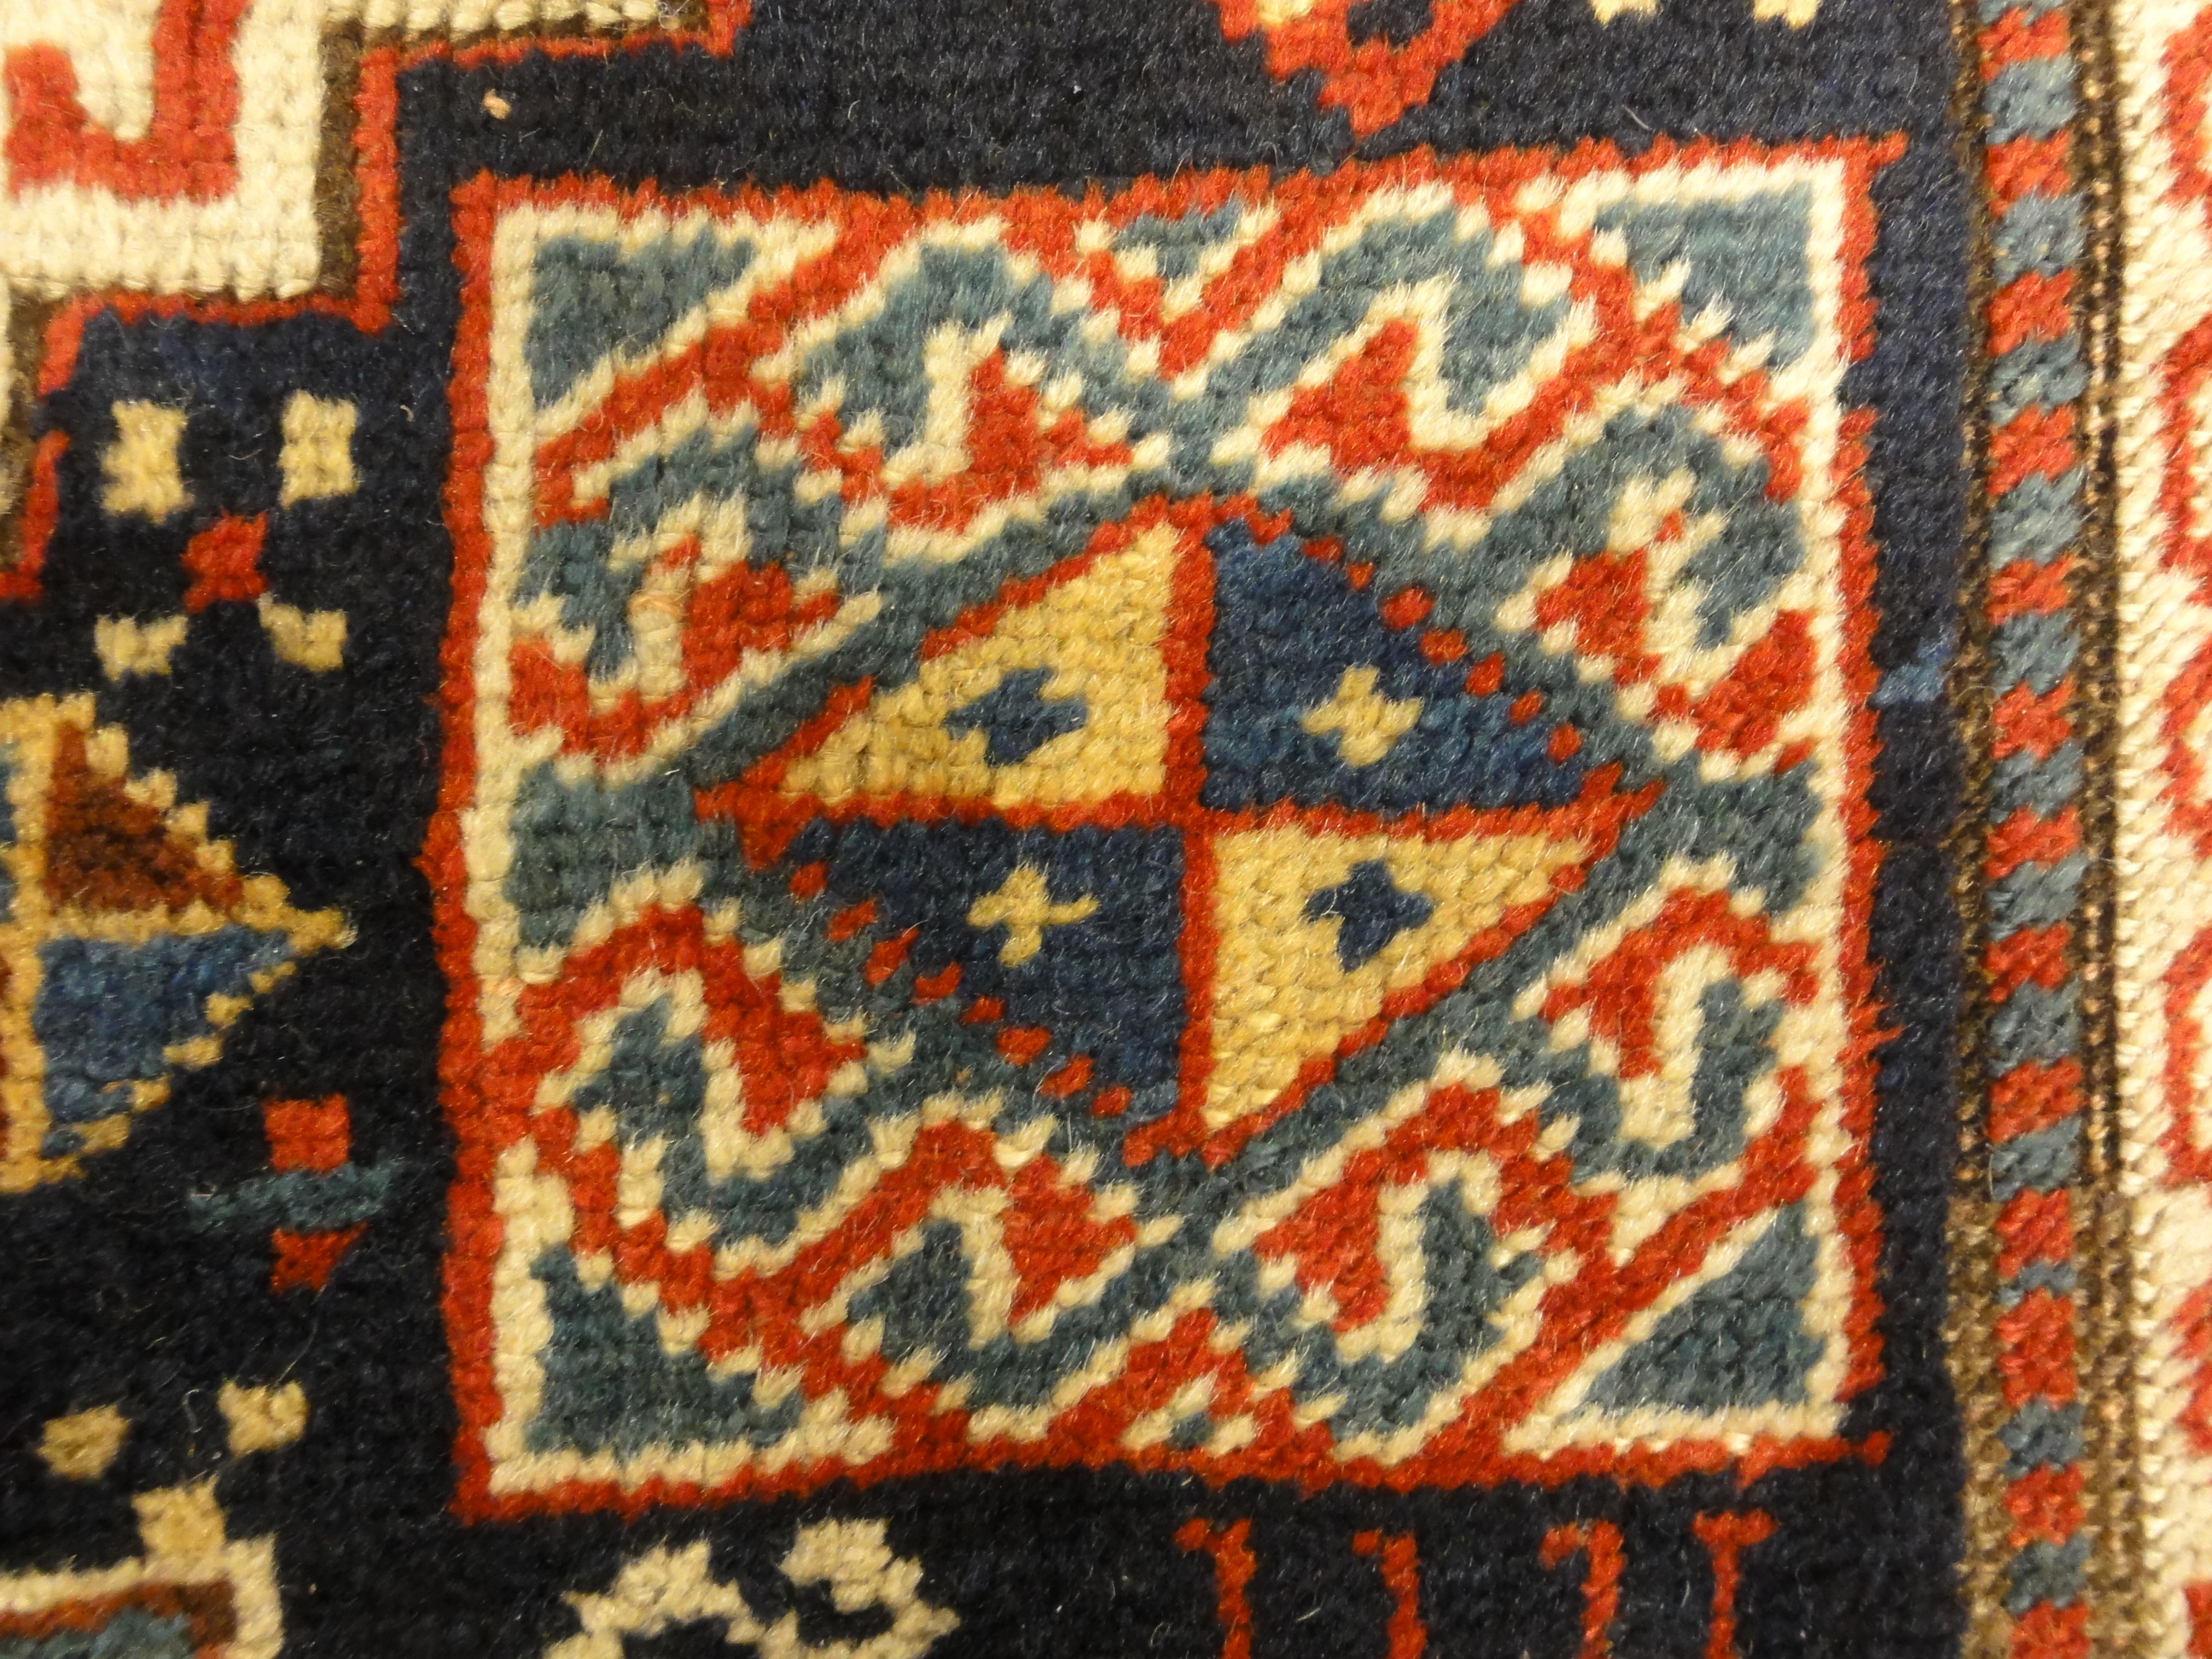 Caucasian Marriage Rug From 1880s. A piece of genuine antique woven carpet art sold by the Santa Barbara Design Center, Rugs and More.